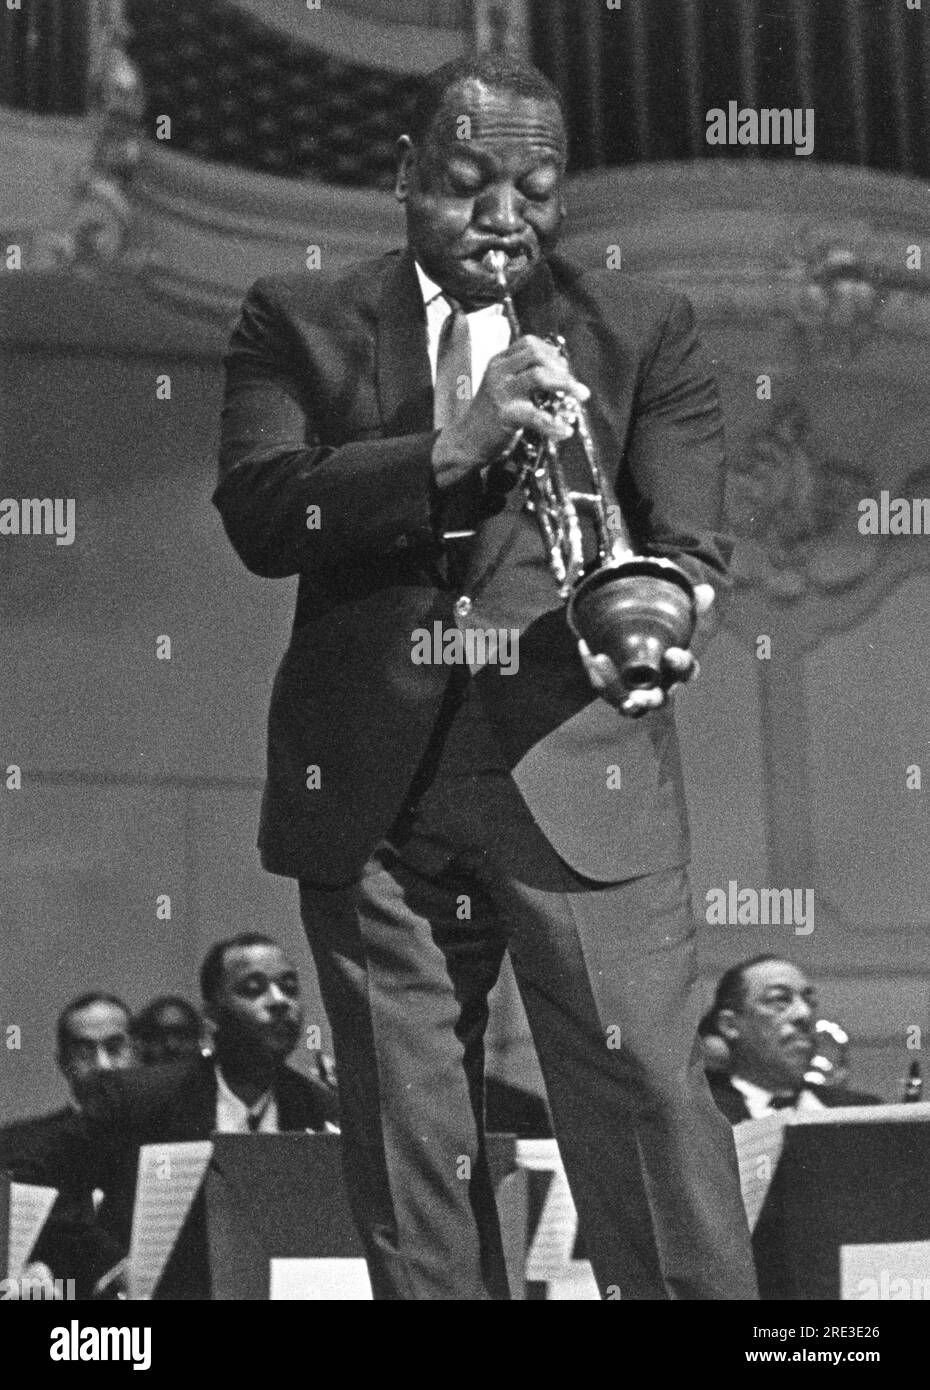 Williams, Charles Melvin 'Cootie', 10.7.1911 - 15.9,1985, musicista americano (trombettista), ADDITIONAL-RIGHTS-CLEARANCE-INFO-NOT-AVAILABLE Foto Stock